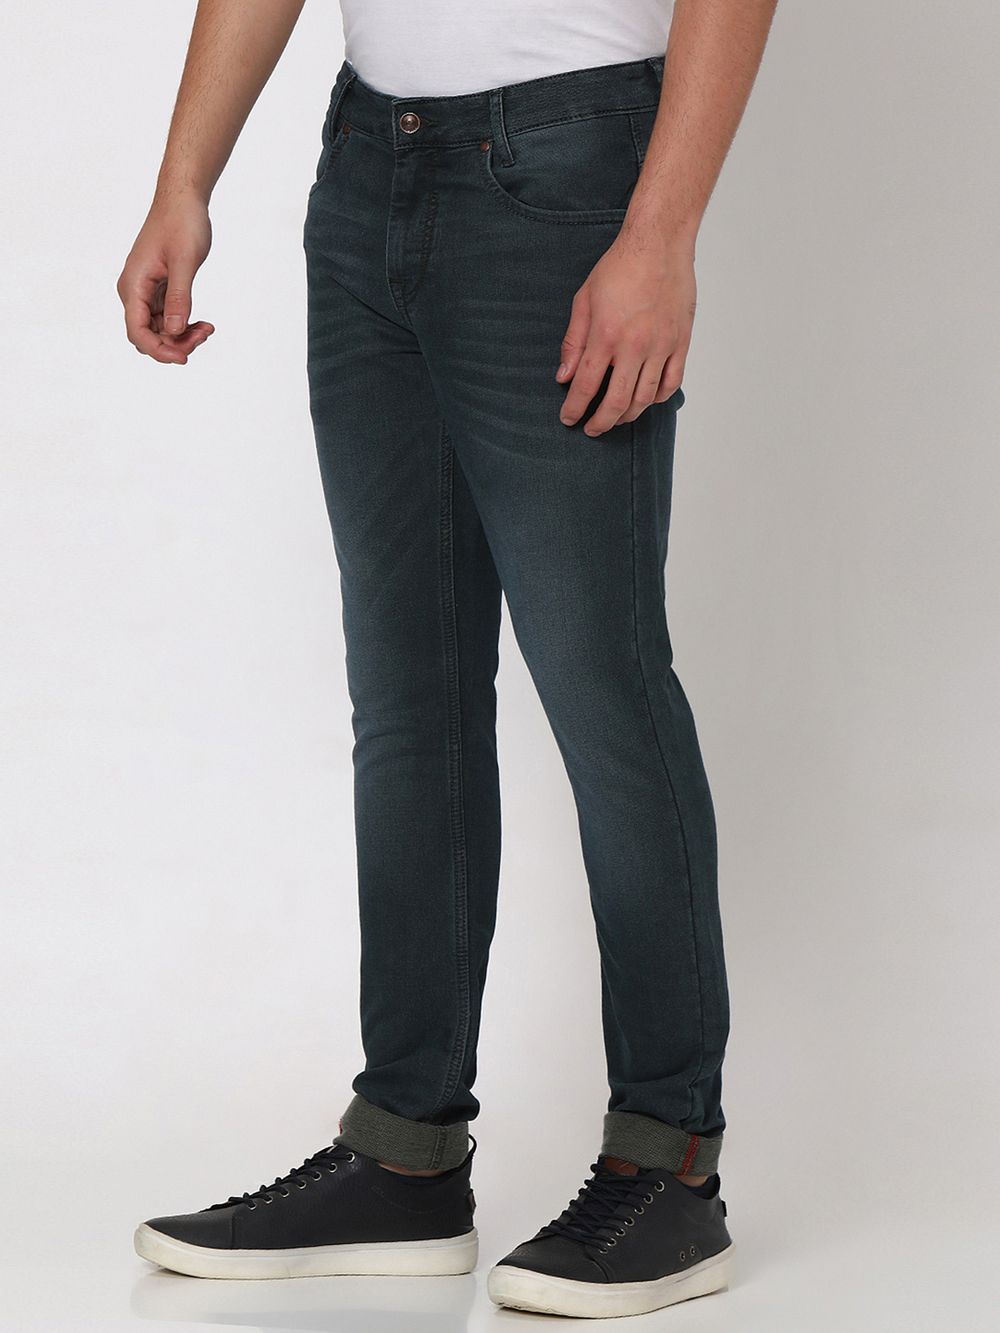 Olive Skinny Fit Denim Deluxe Stretch Jeans